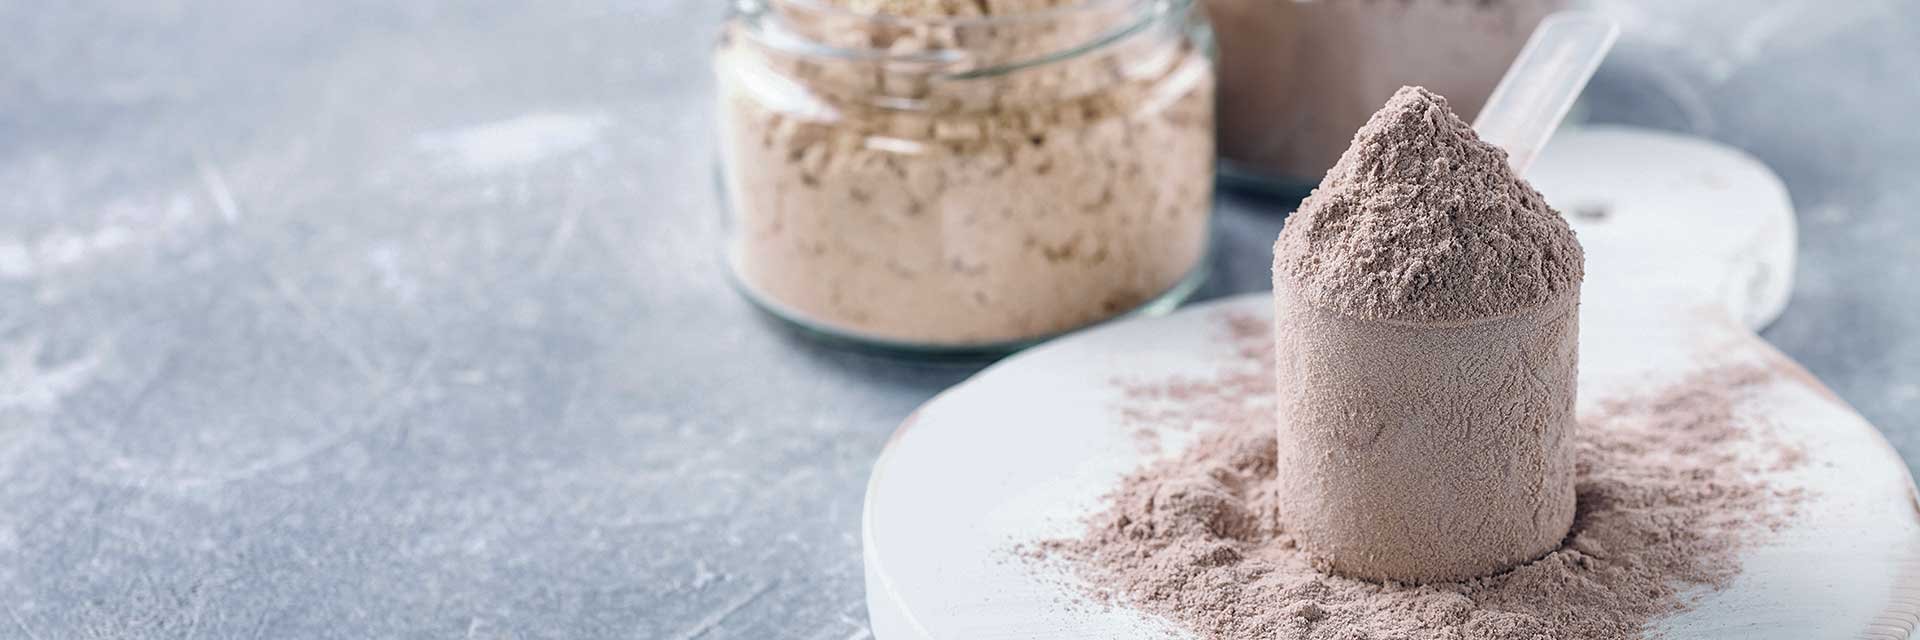 How much Protein Powder is REALLY in a tablespoon? - 10g, 20g, 40g? — Scoop Shaker